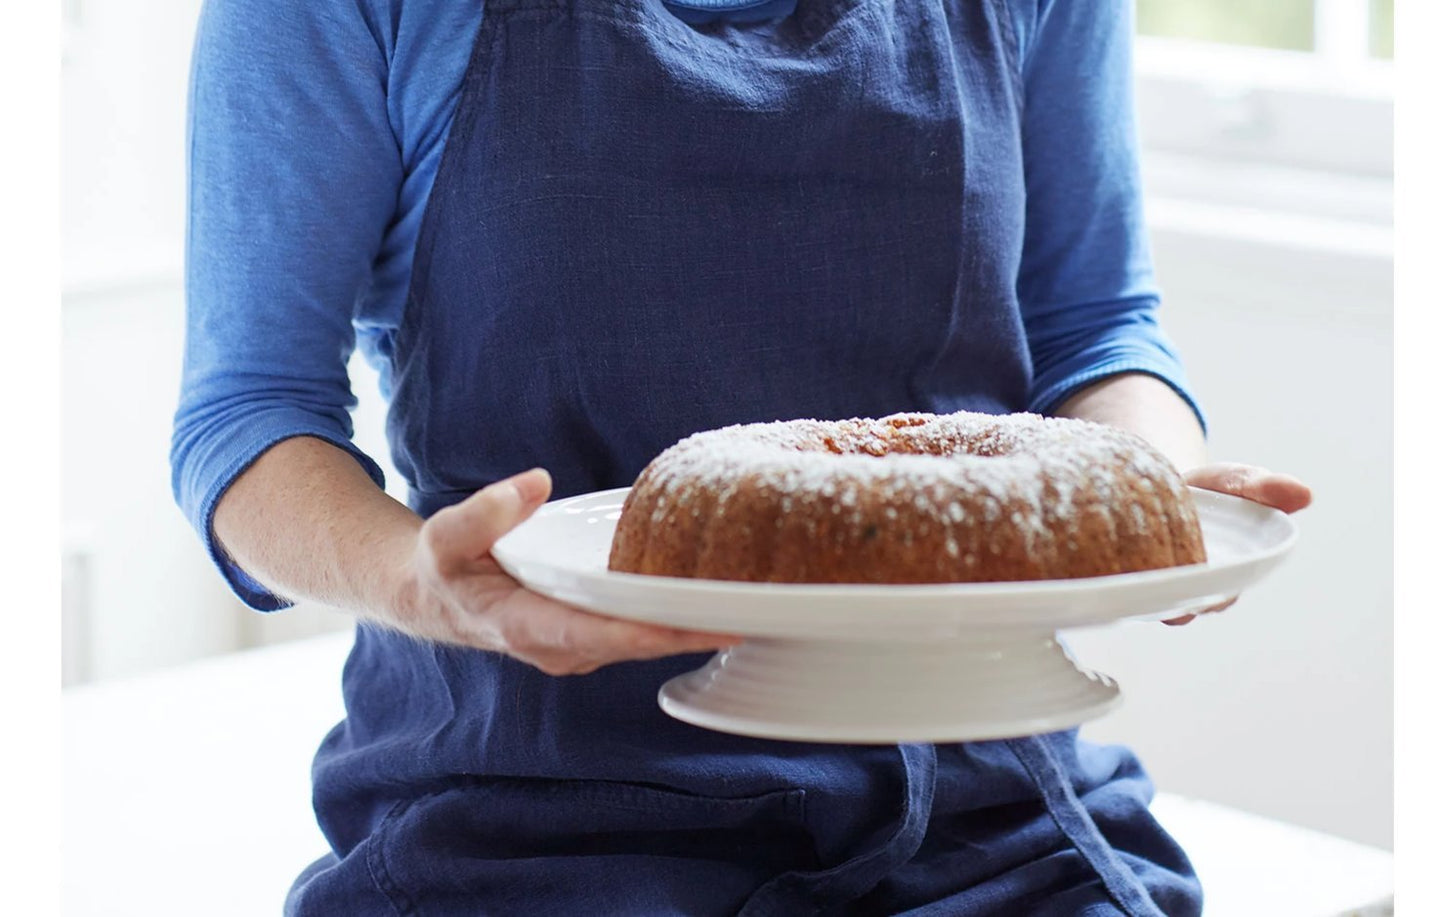 person wearing blue apron holding cake plate with cake on it.